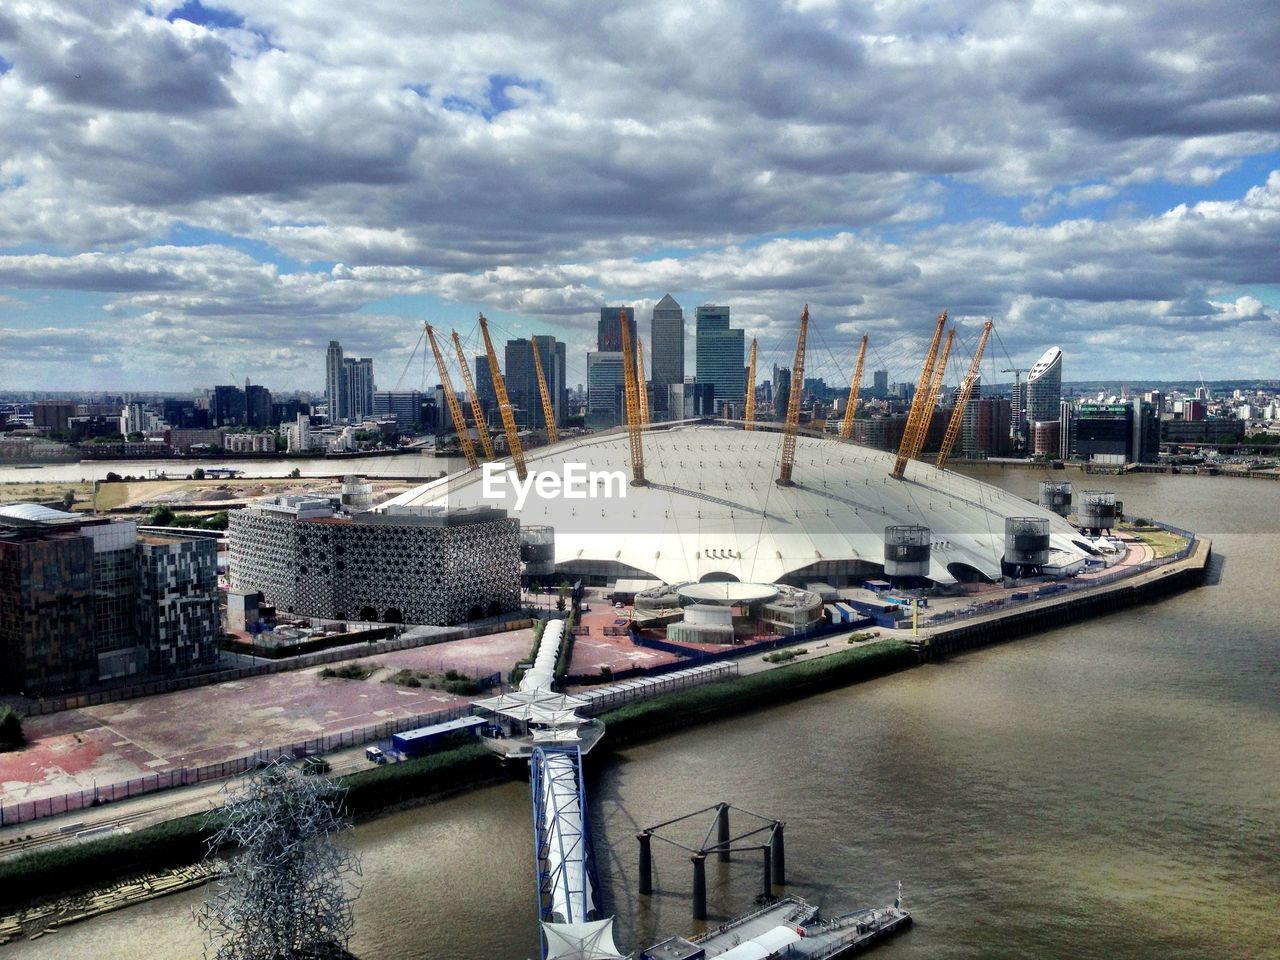 High angle view of millennium dome by river against cloudy sky